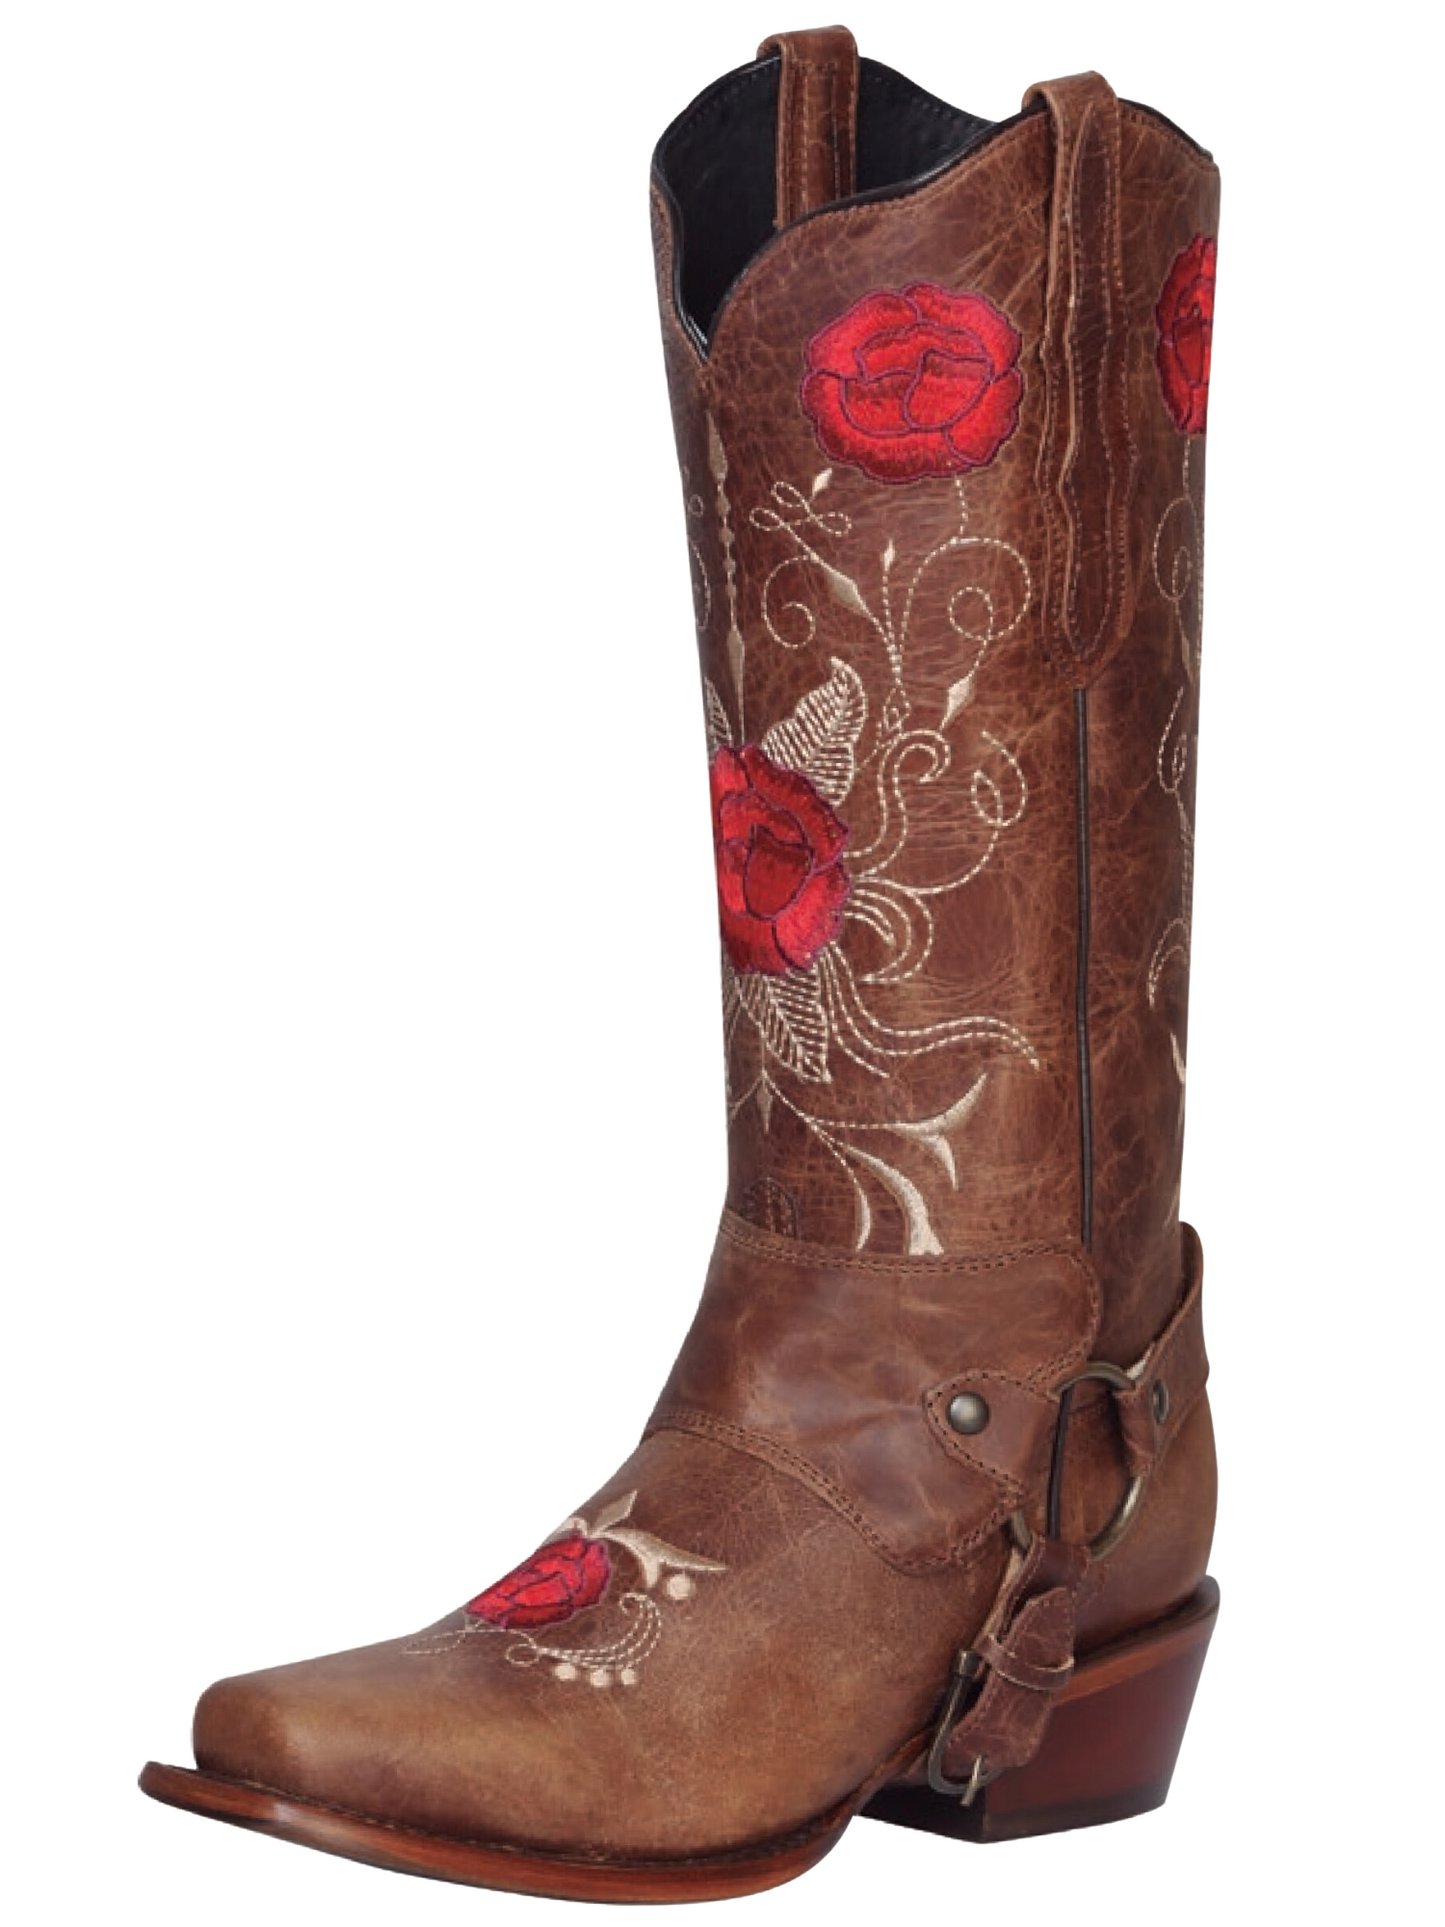 Rodeo Harness Cowboy Boots with Embroidered Genuine Leather Flower Tube for Women 'El General' - ID: 41783